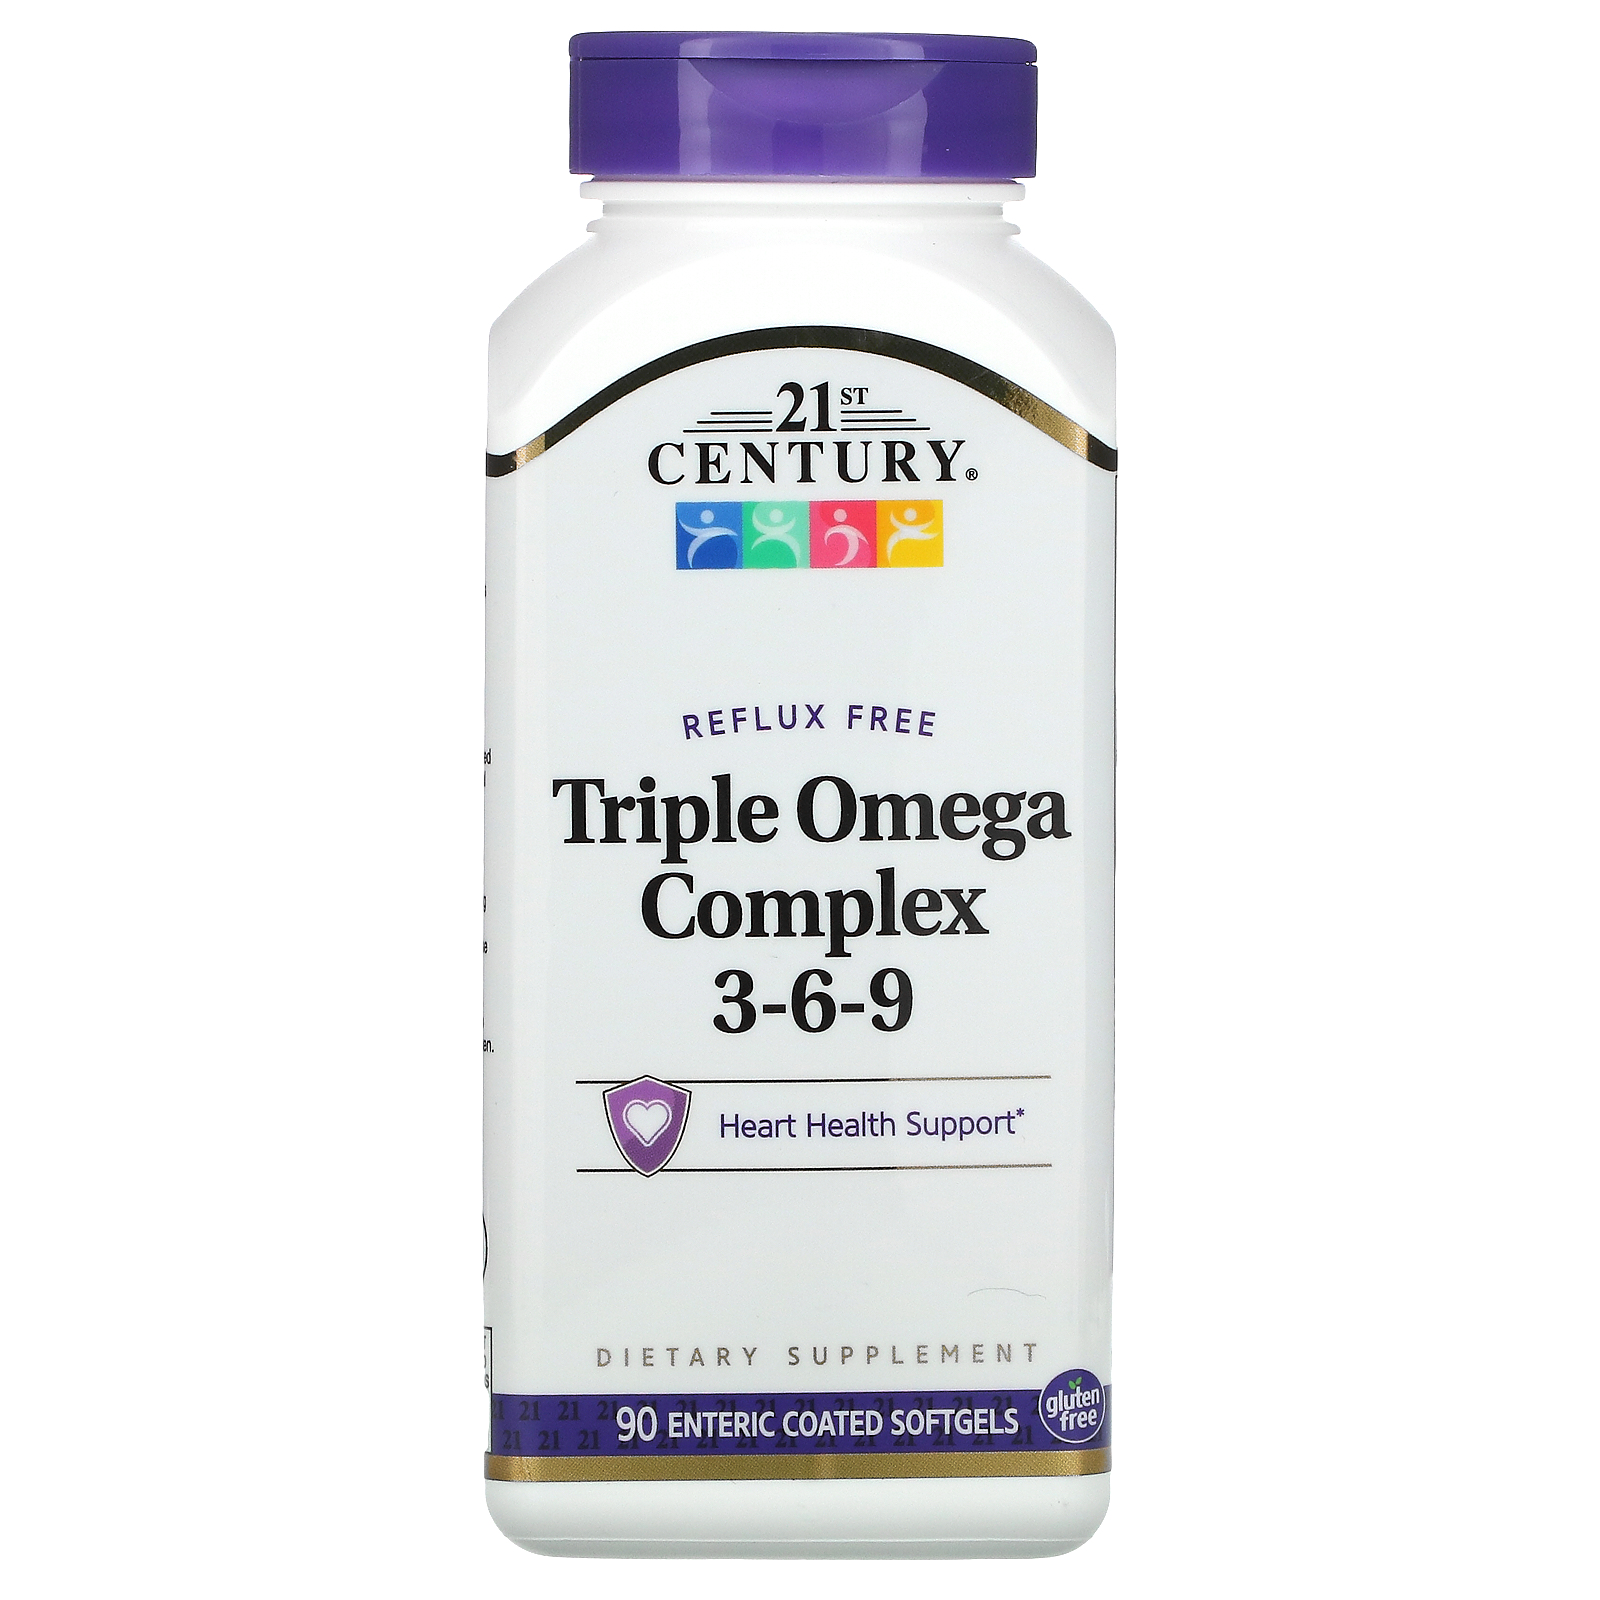 21st century omega 3 review